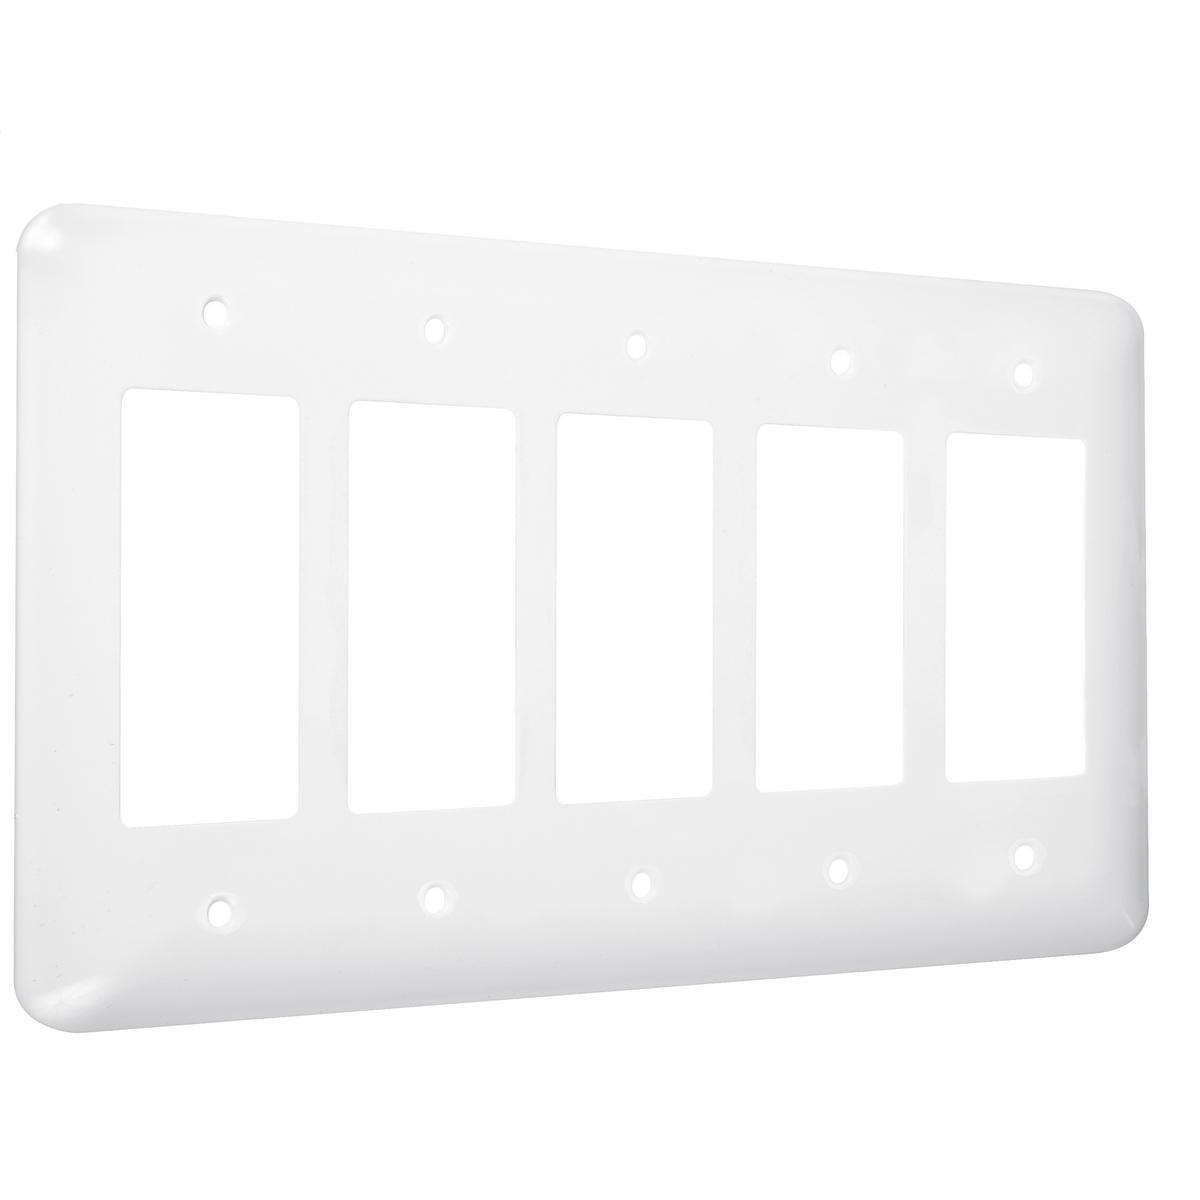 Hubbell WRW-5R 5-Gang Metal Wallplate, Maxi, 5-Decorator, White Smooth  ; Easily primed and painted to match or complement walls. ; Won't bow, crack or distort during installation. ; Premium North American powder coat. ; Includes screw(s) in matching finish.